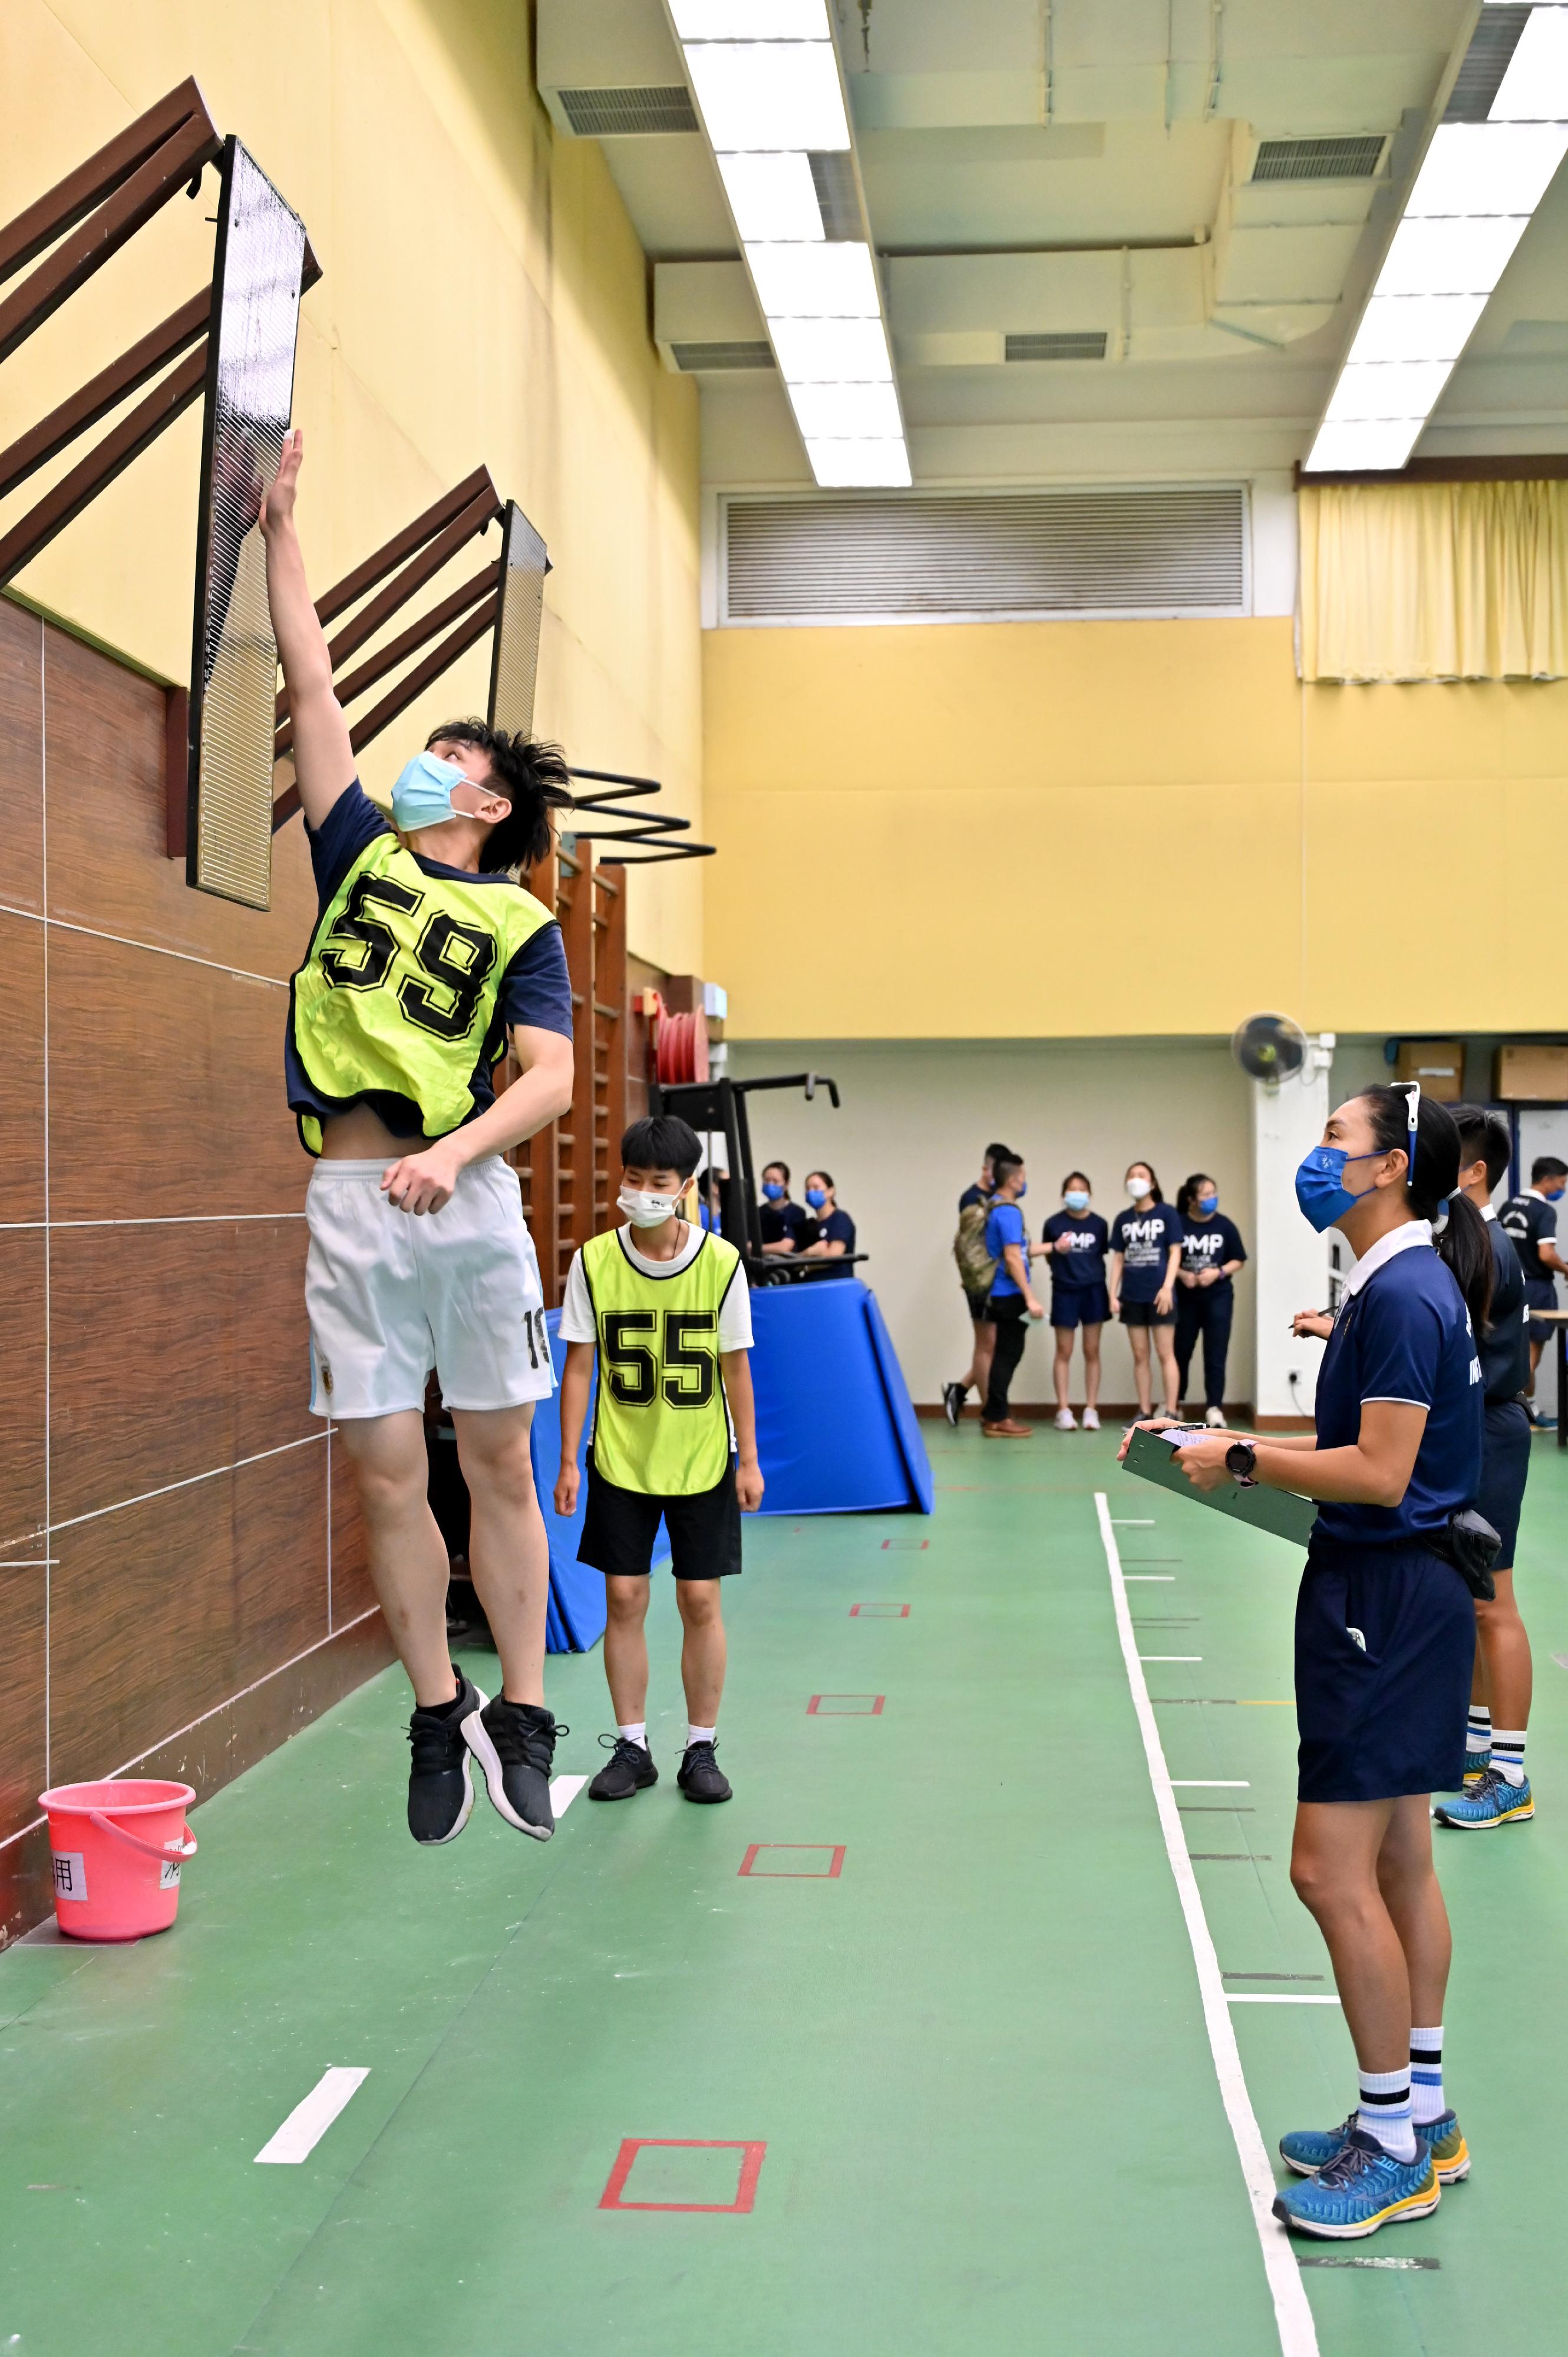 The Hong Kong Police Force today (June 19) organised the Police Recruitment Experience and Assessment Day at the Hong Kong Police College. Photo shows participants attending the physical fitness test workshop.